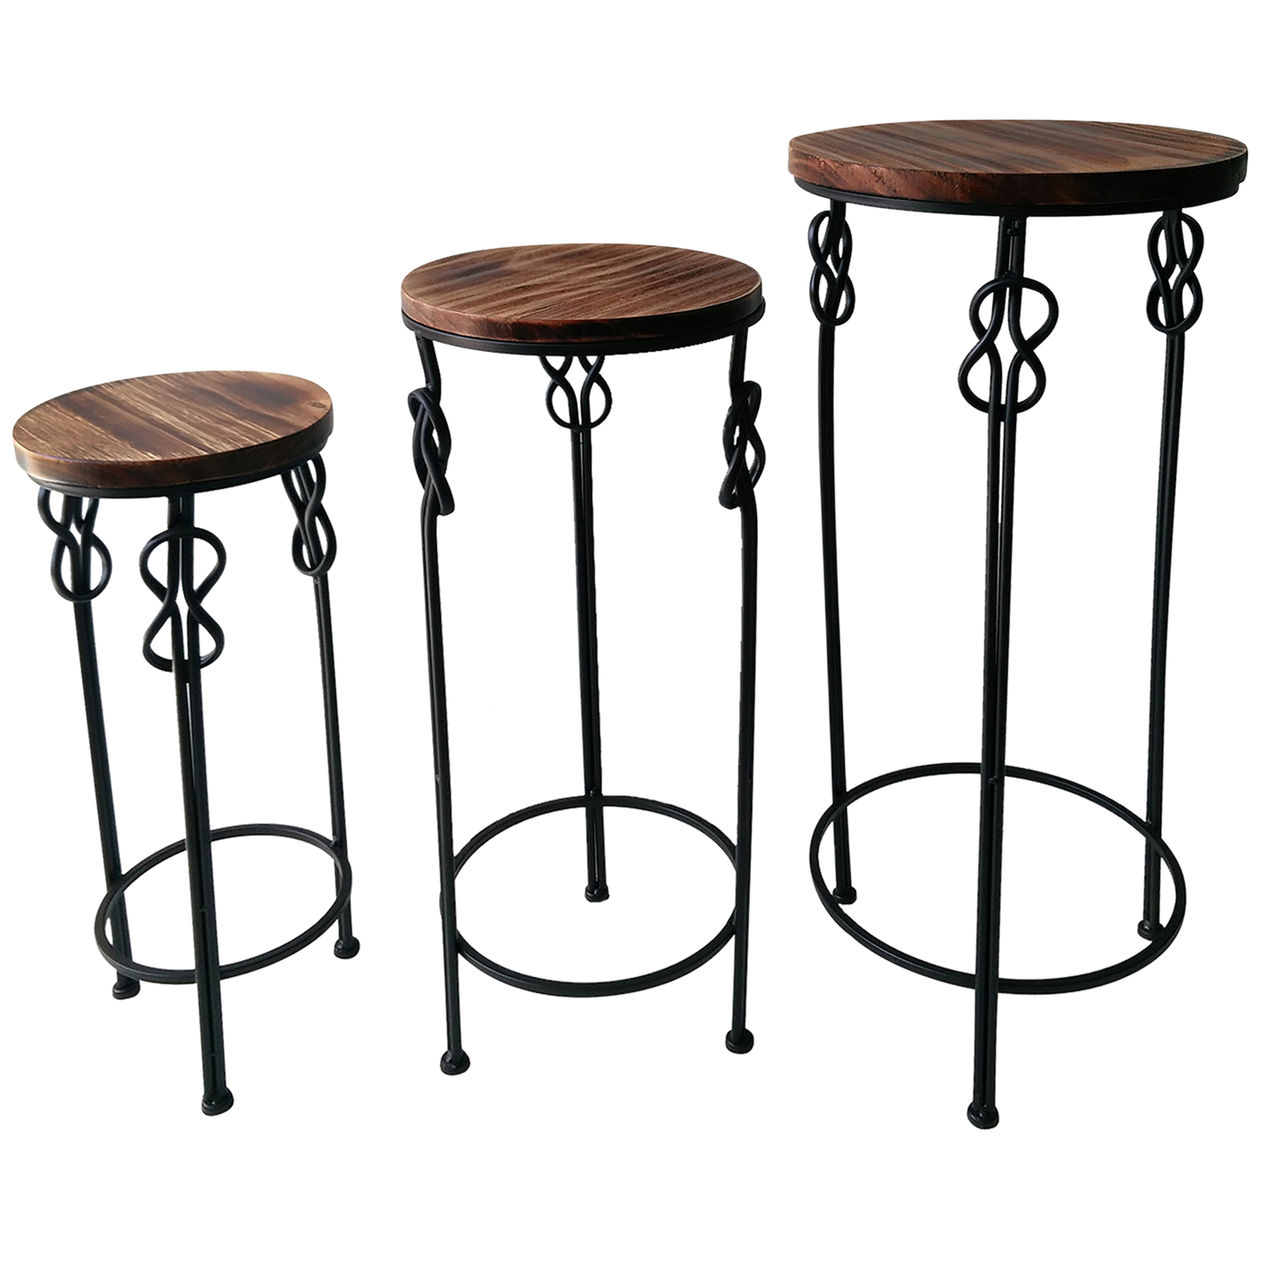 small round wood steel knot accent table home amp garden furniture coffee classic design white contemporary living room sofa tables chairside cover thai square target outdoor wall